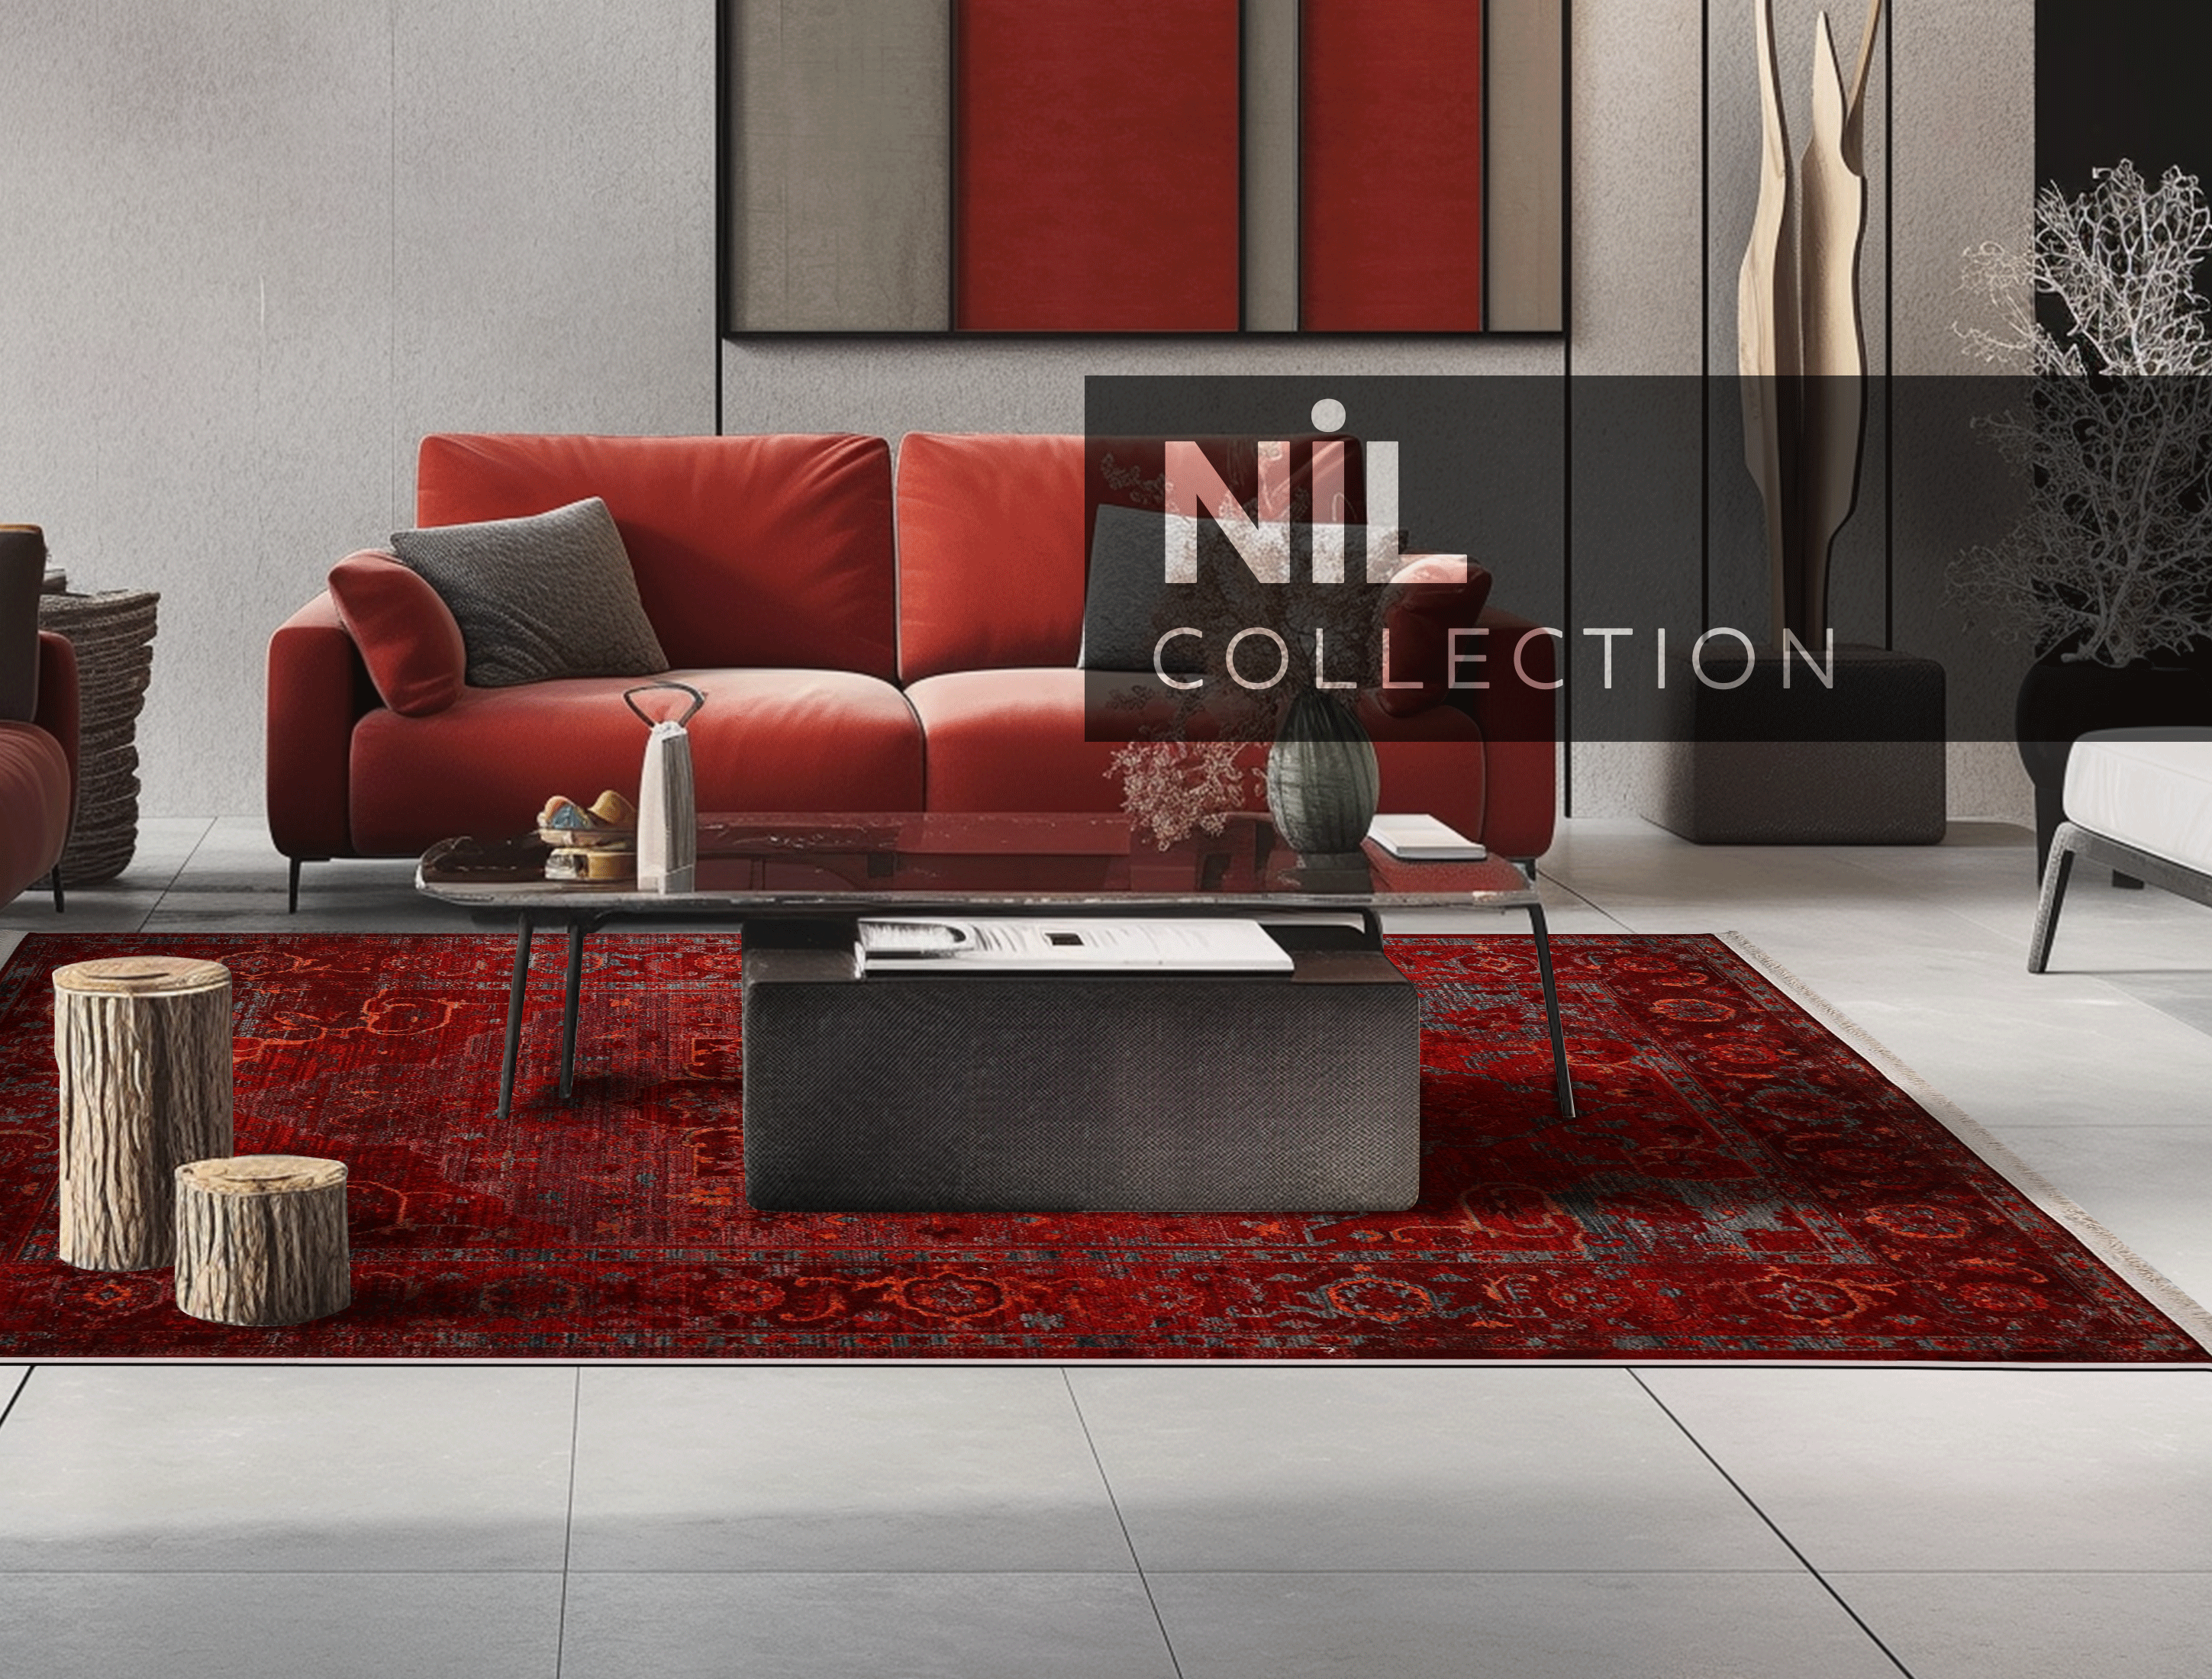 Nil Collection